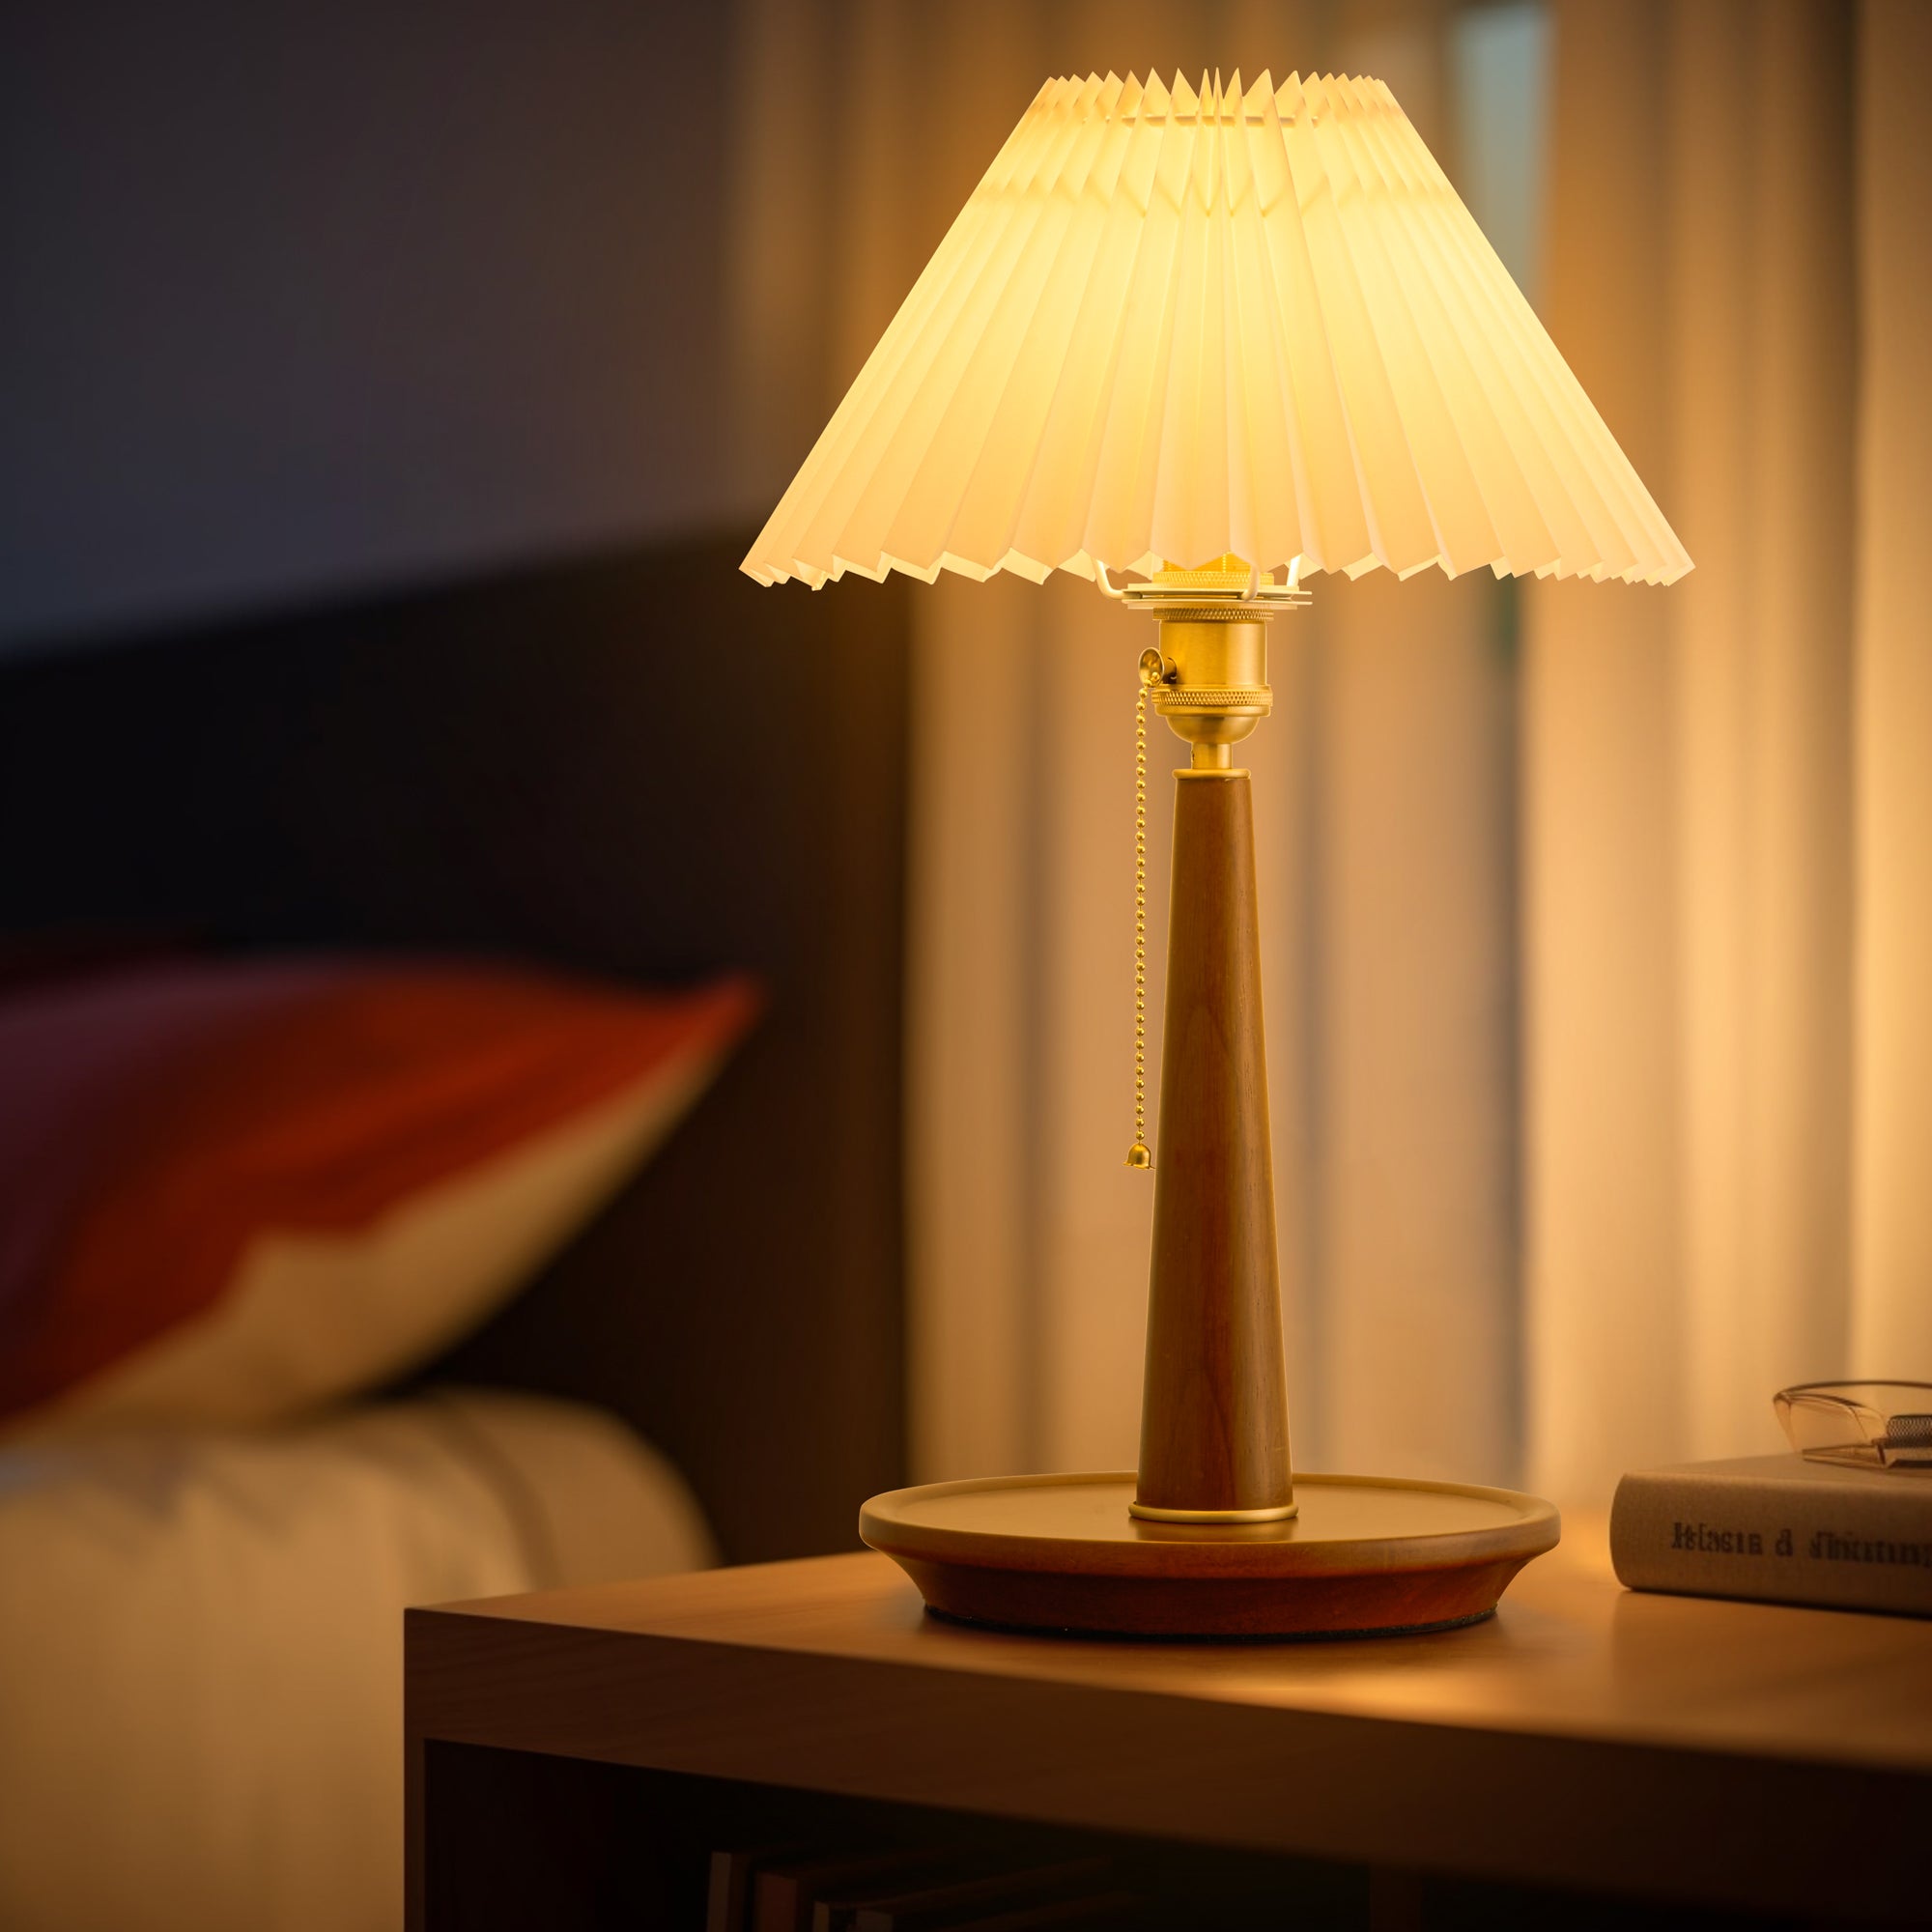 Walnut Table Lamp with Empire Lamp Shade bedside lamp